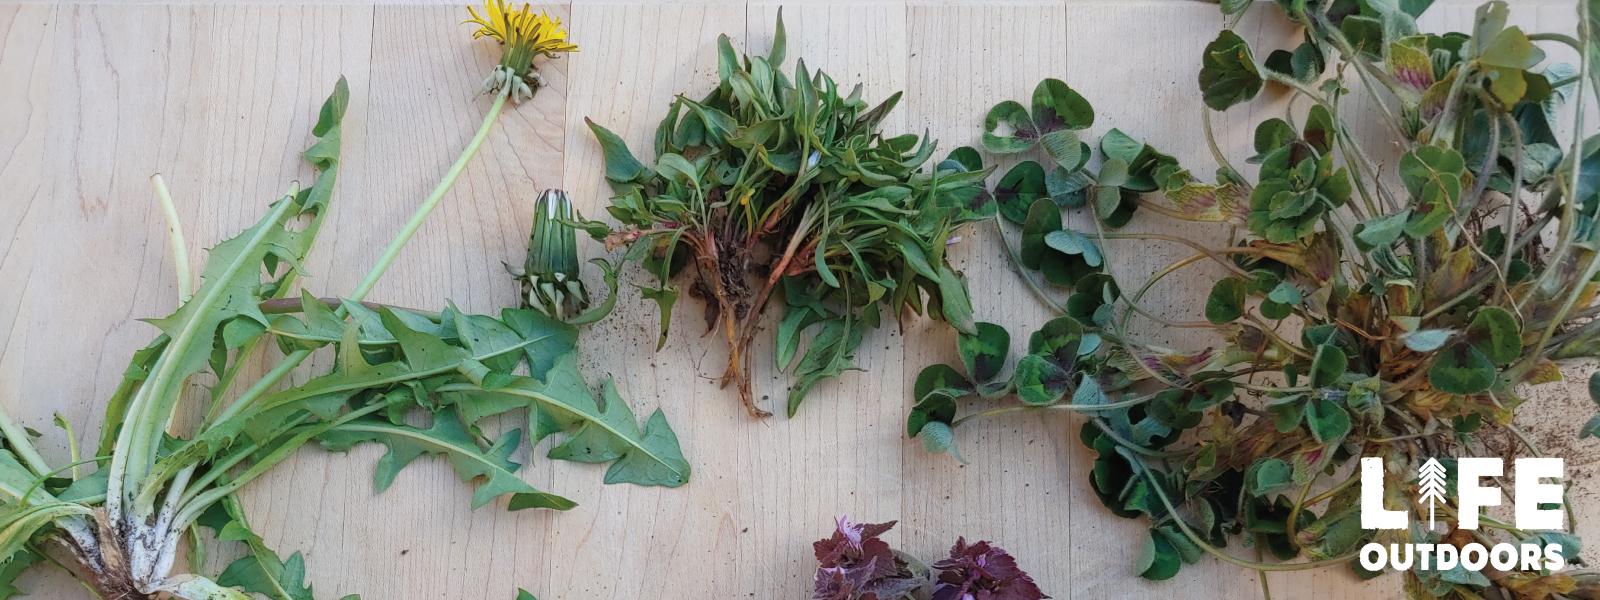 A variety of edible backyard plants are displayed on a cutting board